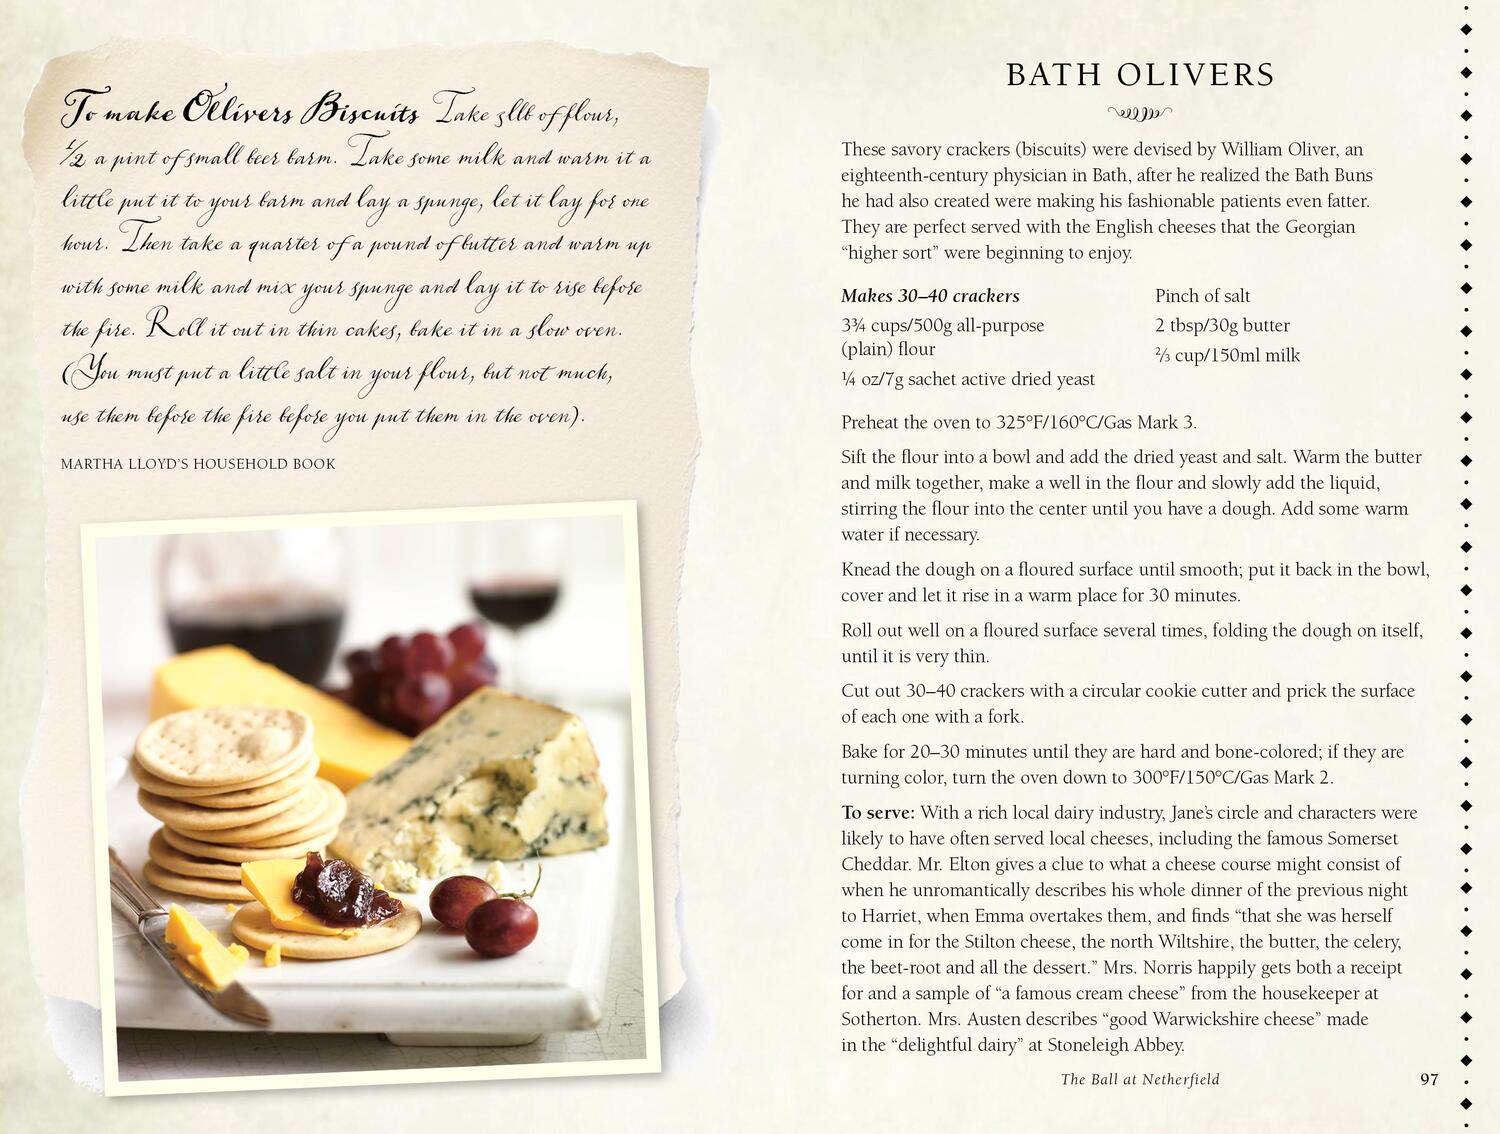 Bild: 9781800652644 | Dinner with Jane Austen | Menus inspired by her novels and letters